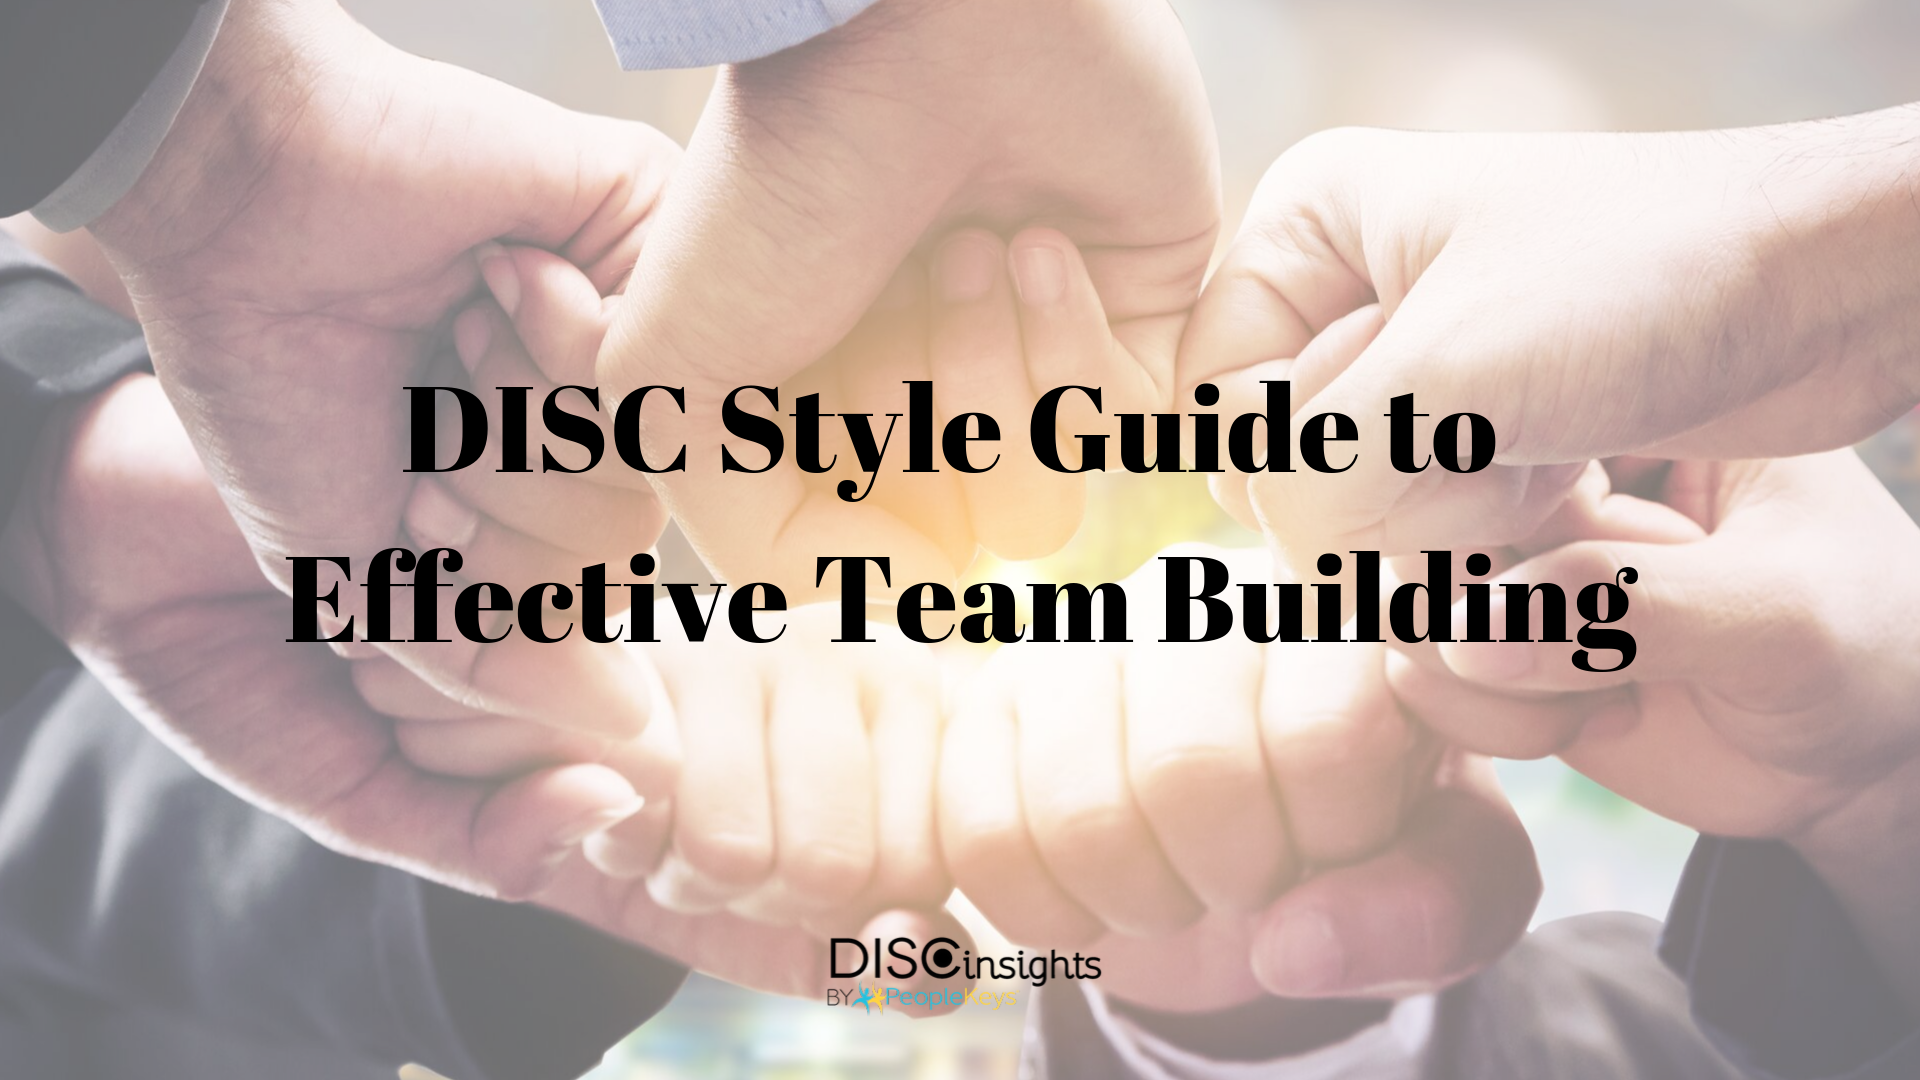 DISC Style Guide to Effective Team Building